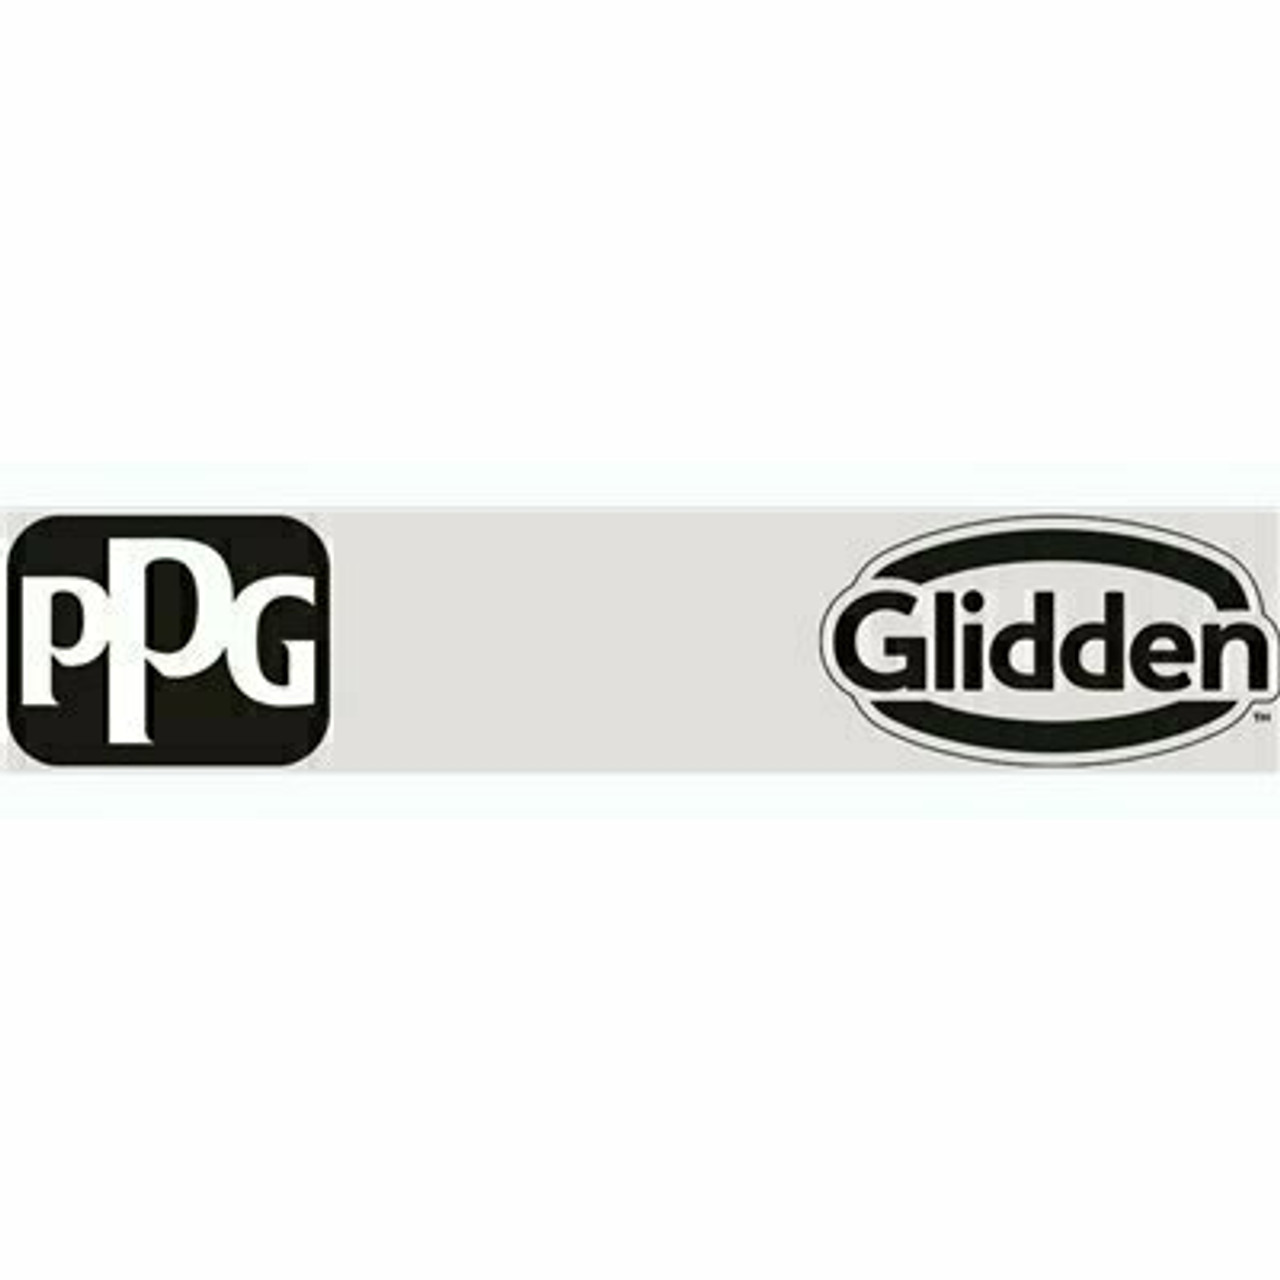 Glidden Diamond 1 Gal. #Ppg1001-3 Thin Ice Flat Interior One-Coat Paint With Primer